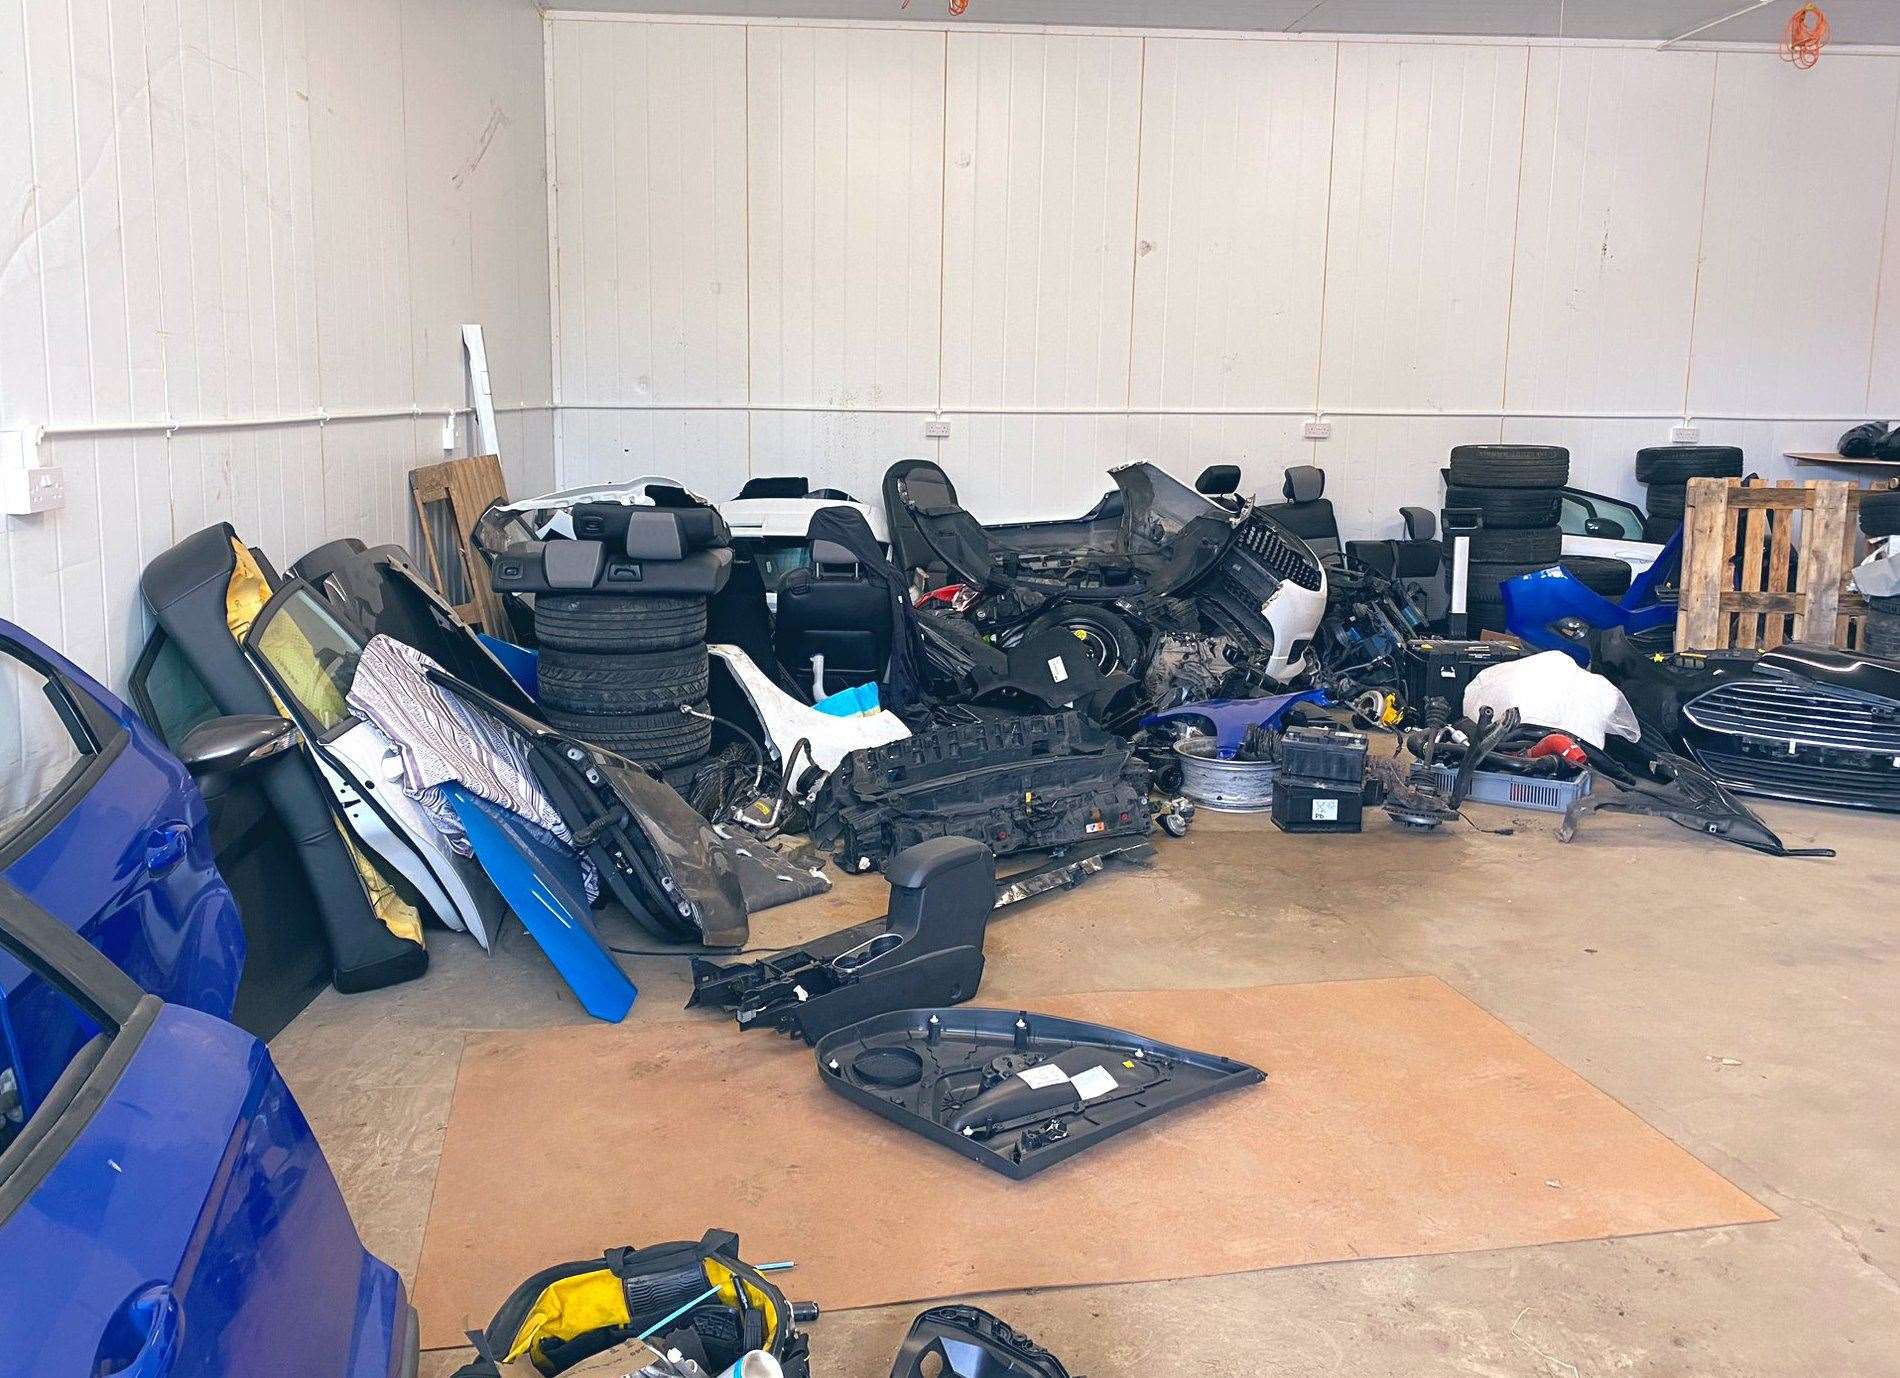 Police discovered two compounds in Teynham full of stolen car parts from across the southeast. Picture: Kent Police